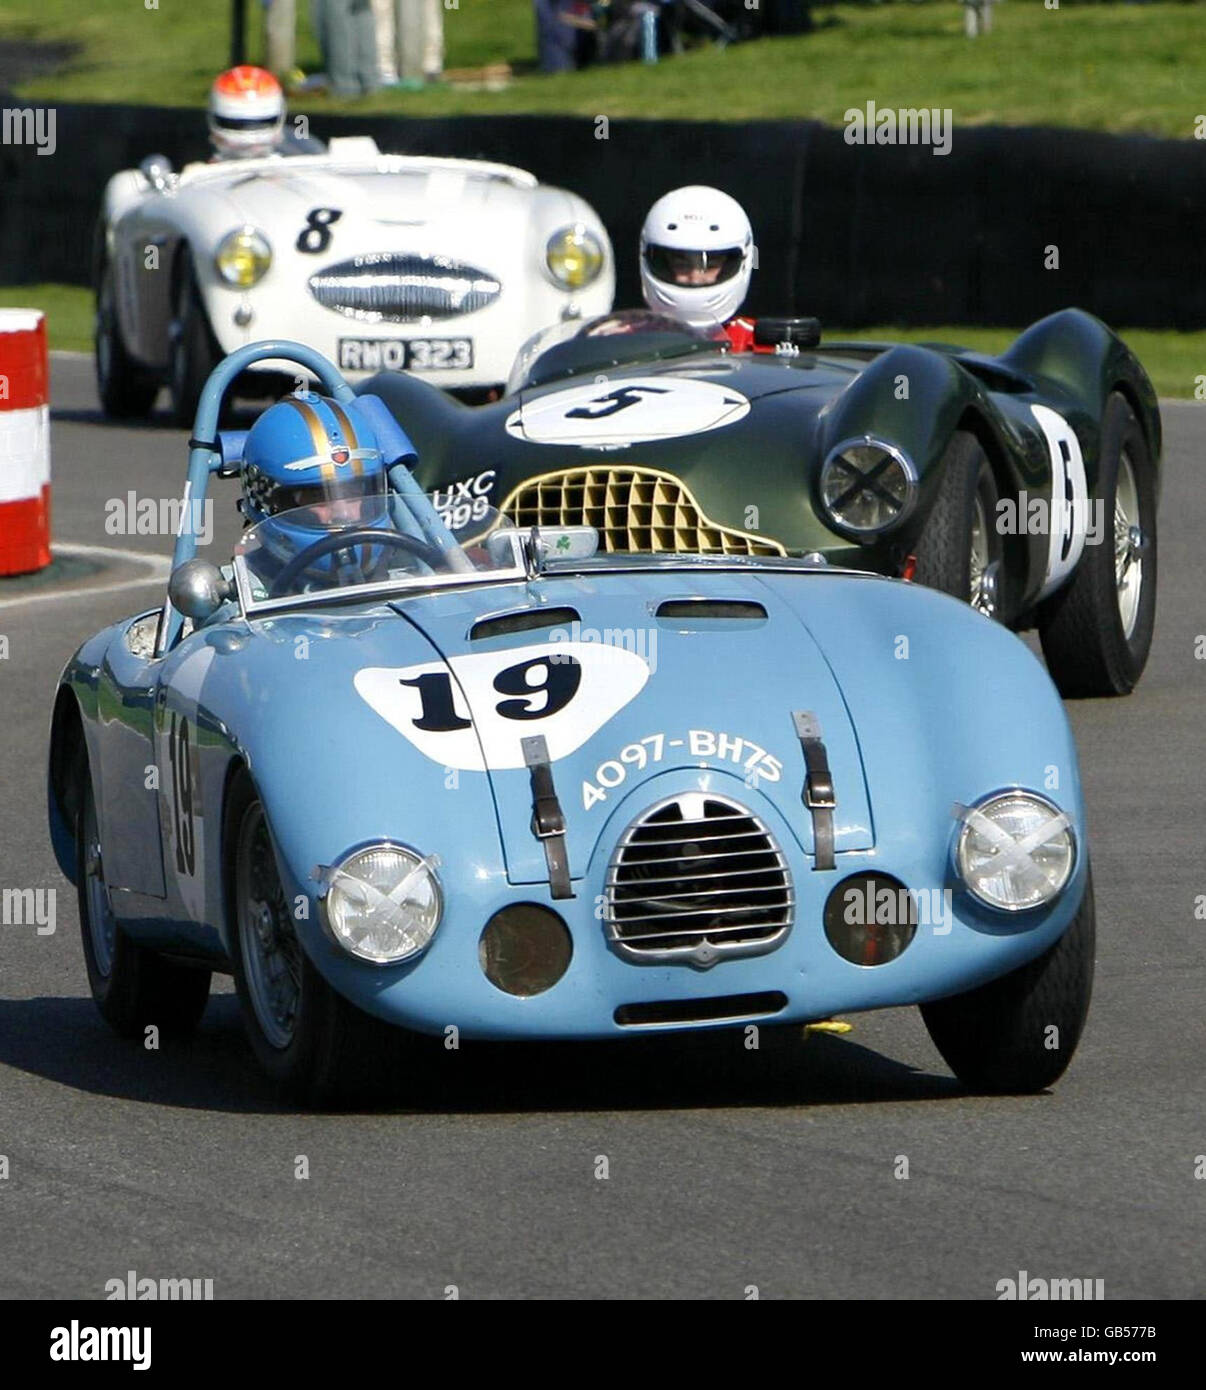 Nick Wigley in a Gordini Type 23S leads through the chicane as he speeds around the track during practice for the Freddie March Memorial Trophy on the first day of the Goodwood Revival Meeting near Chichester, West Sussex. The event relives the glory days of Goodwood Motor Circuit, which ranked alongside Silverstone as one of Britain's leading racing venues throughout its active years between 1948 and 1966. Stock Photo